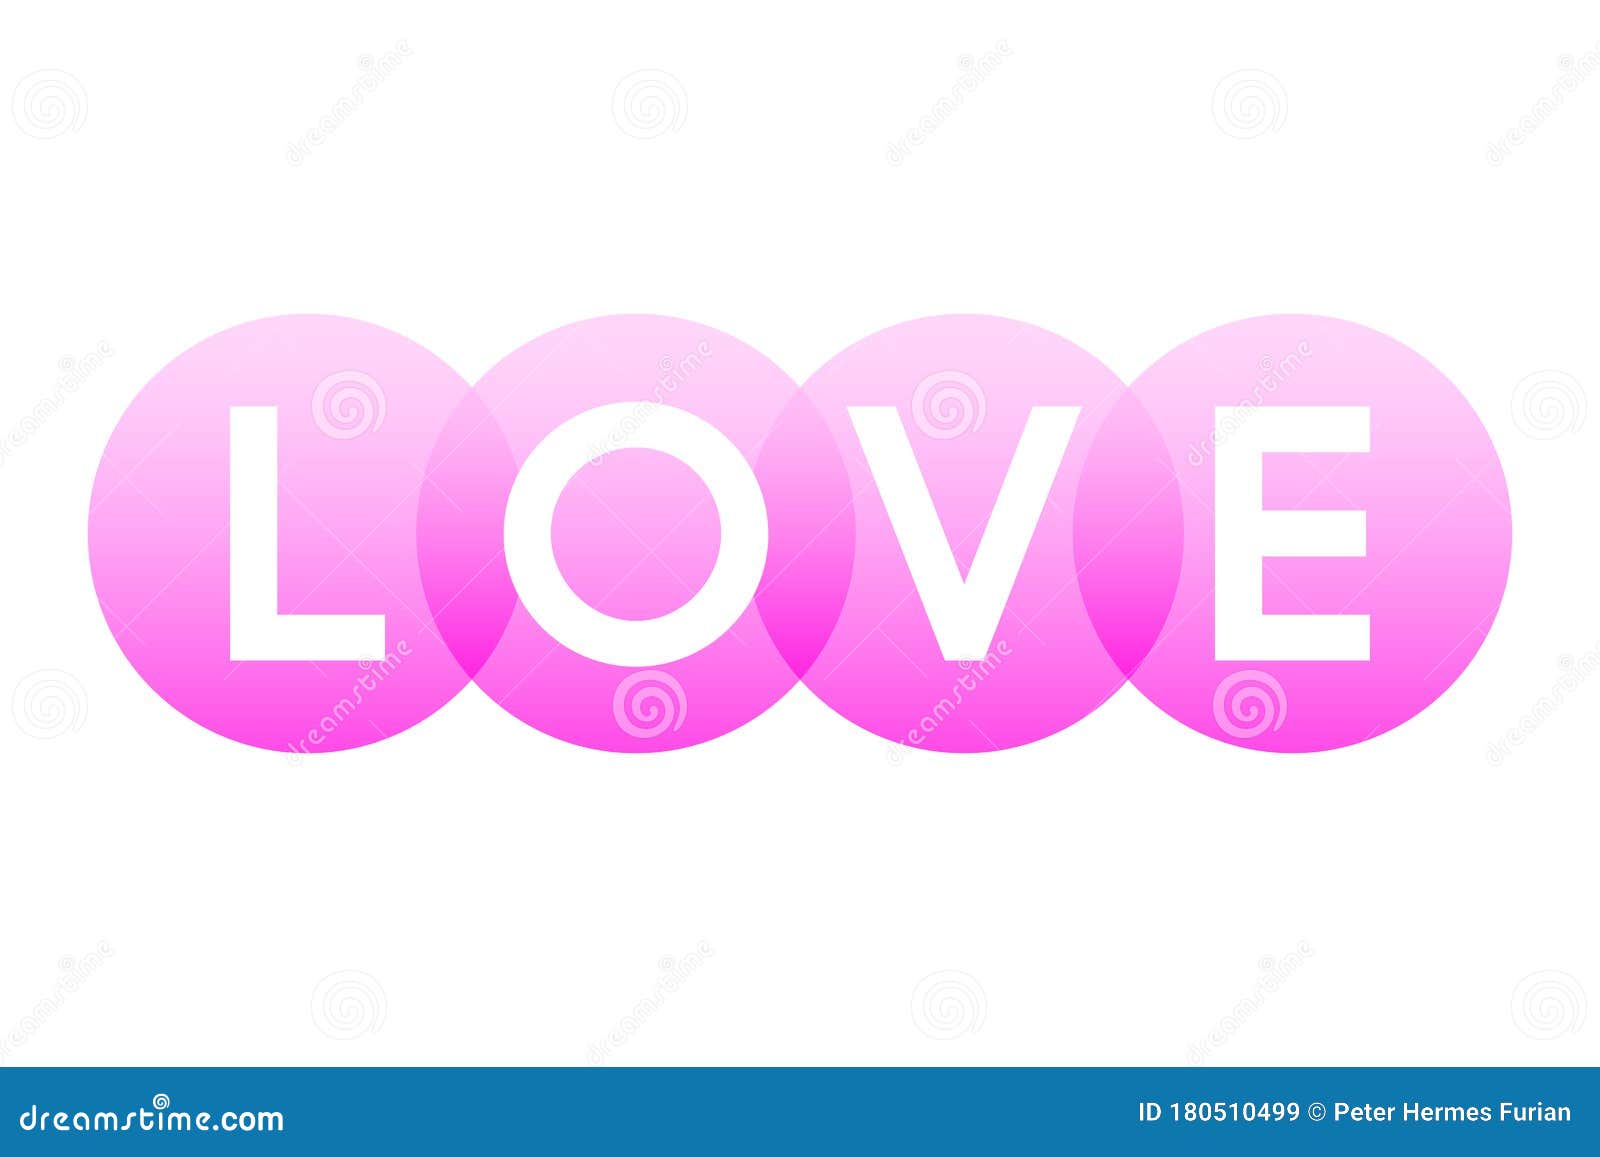 love, letters of the word in white capitals over pink circles